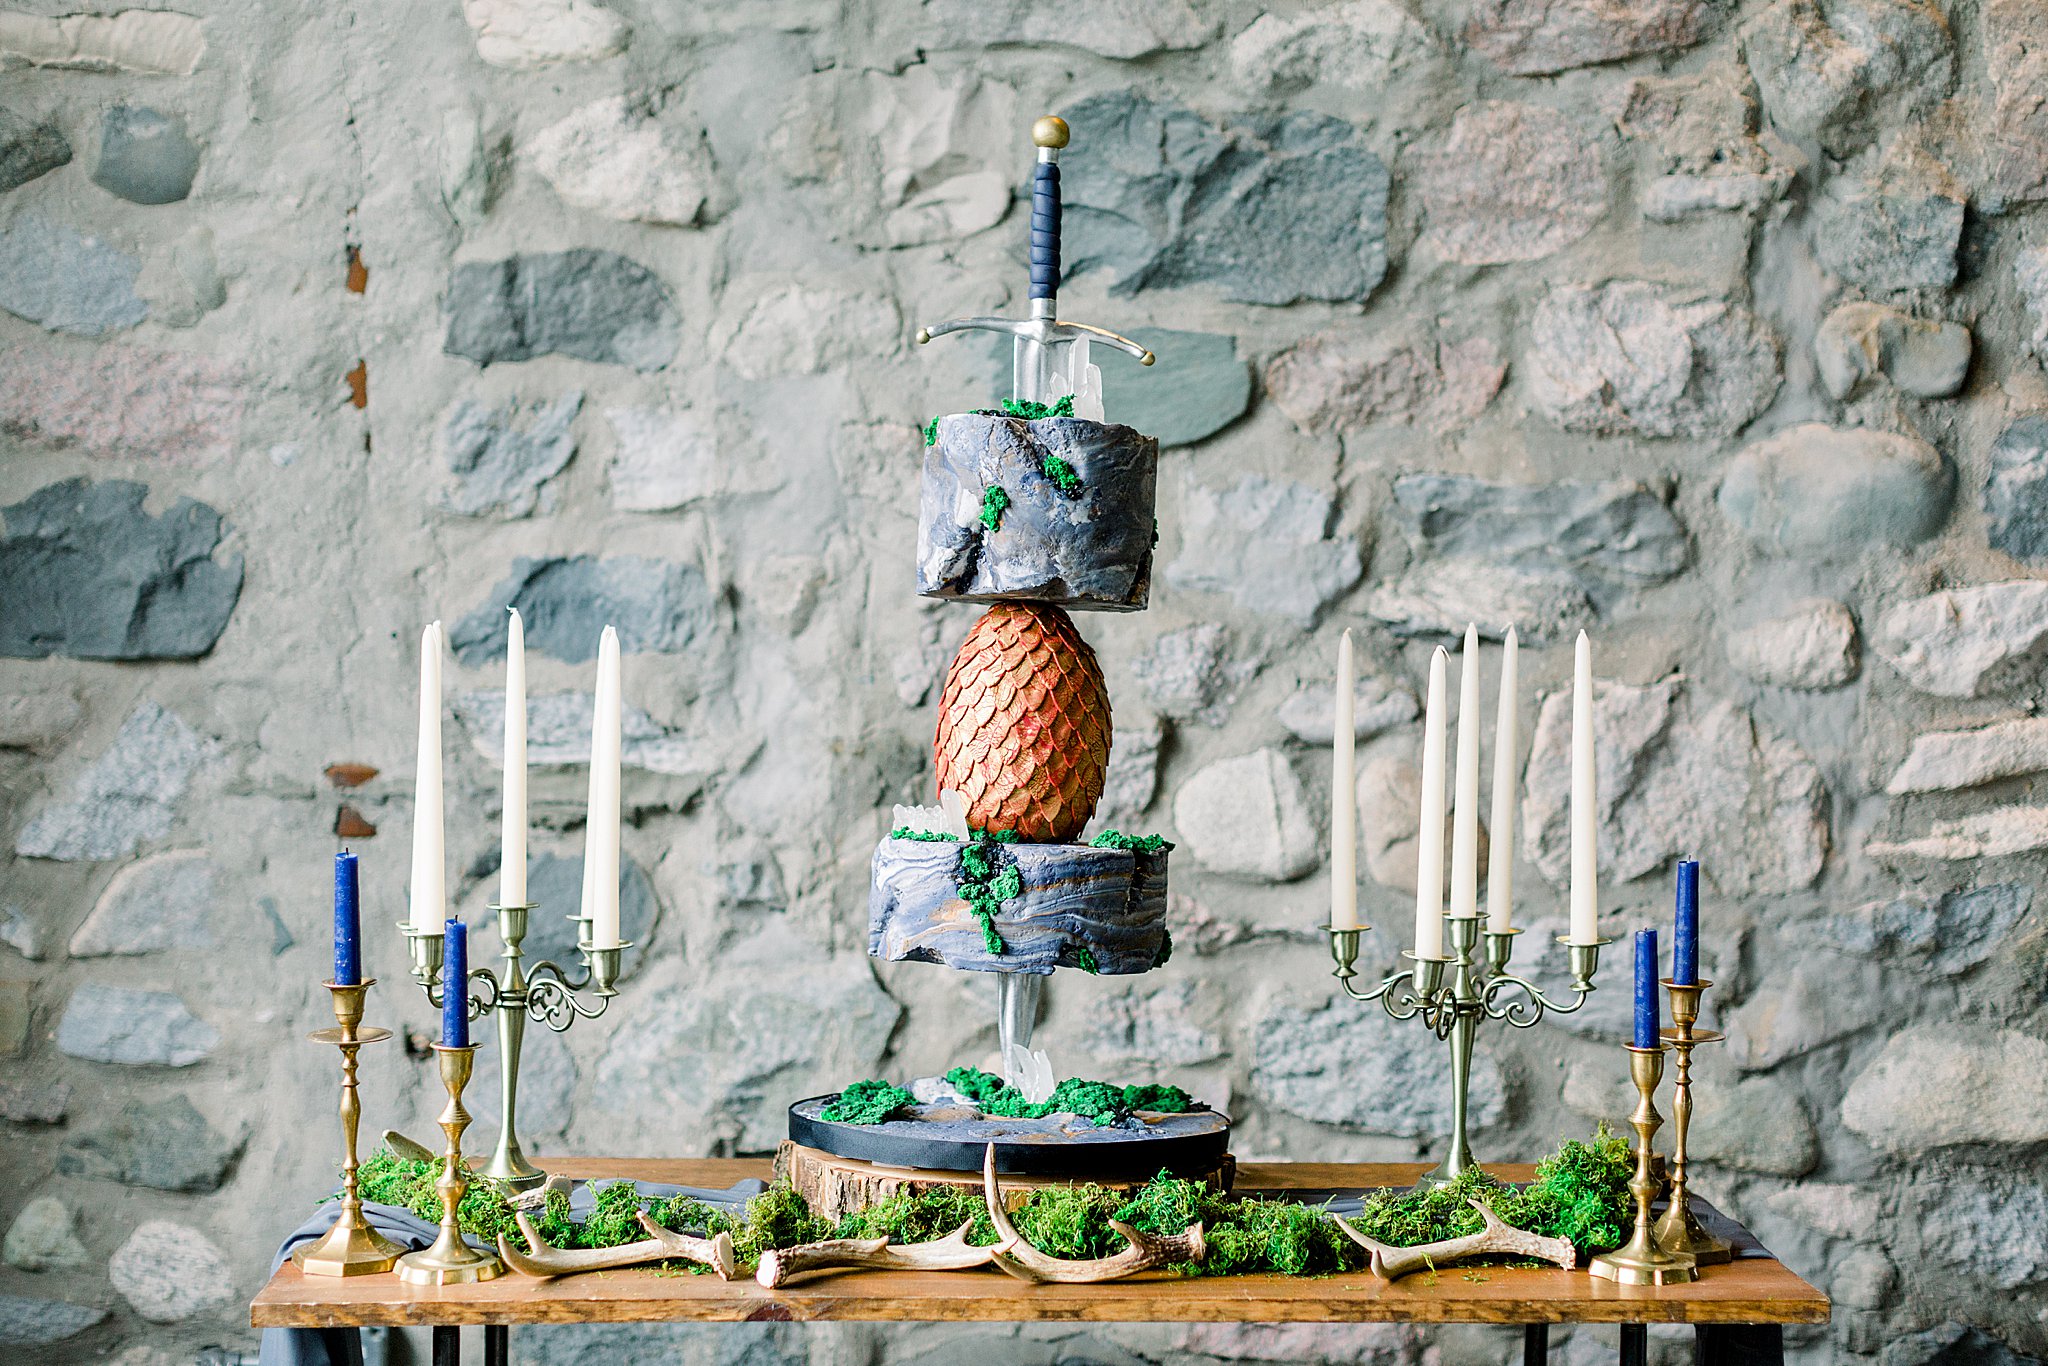 Game of Thrones themed wedding cake at Castle Farms in Charlevoix, Michigan.